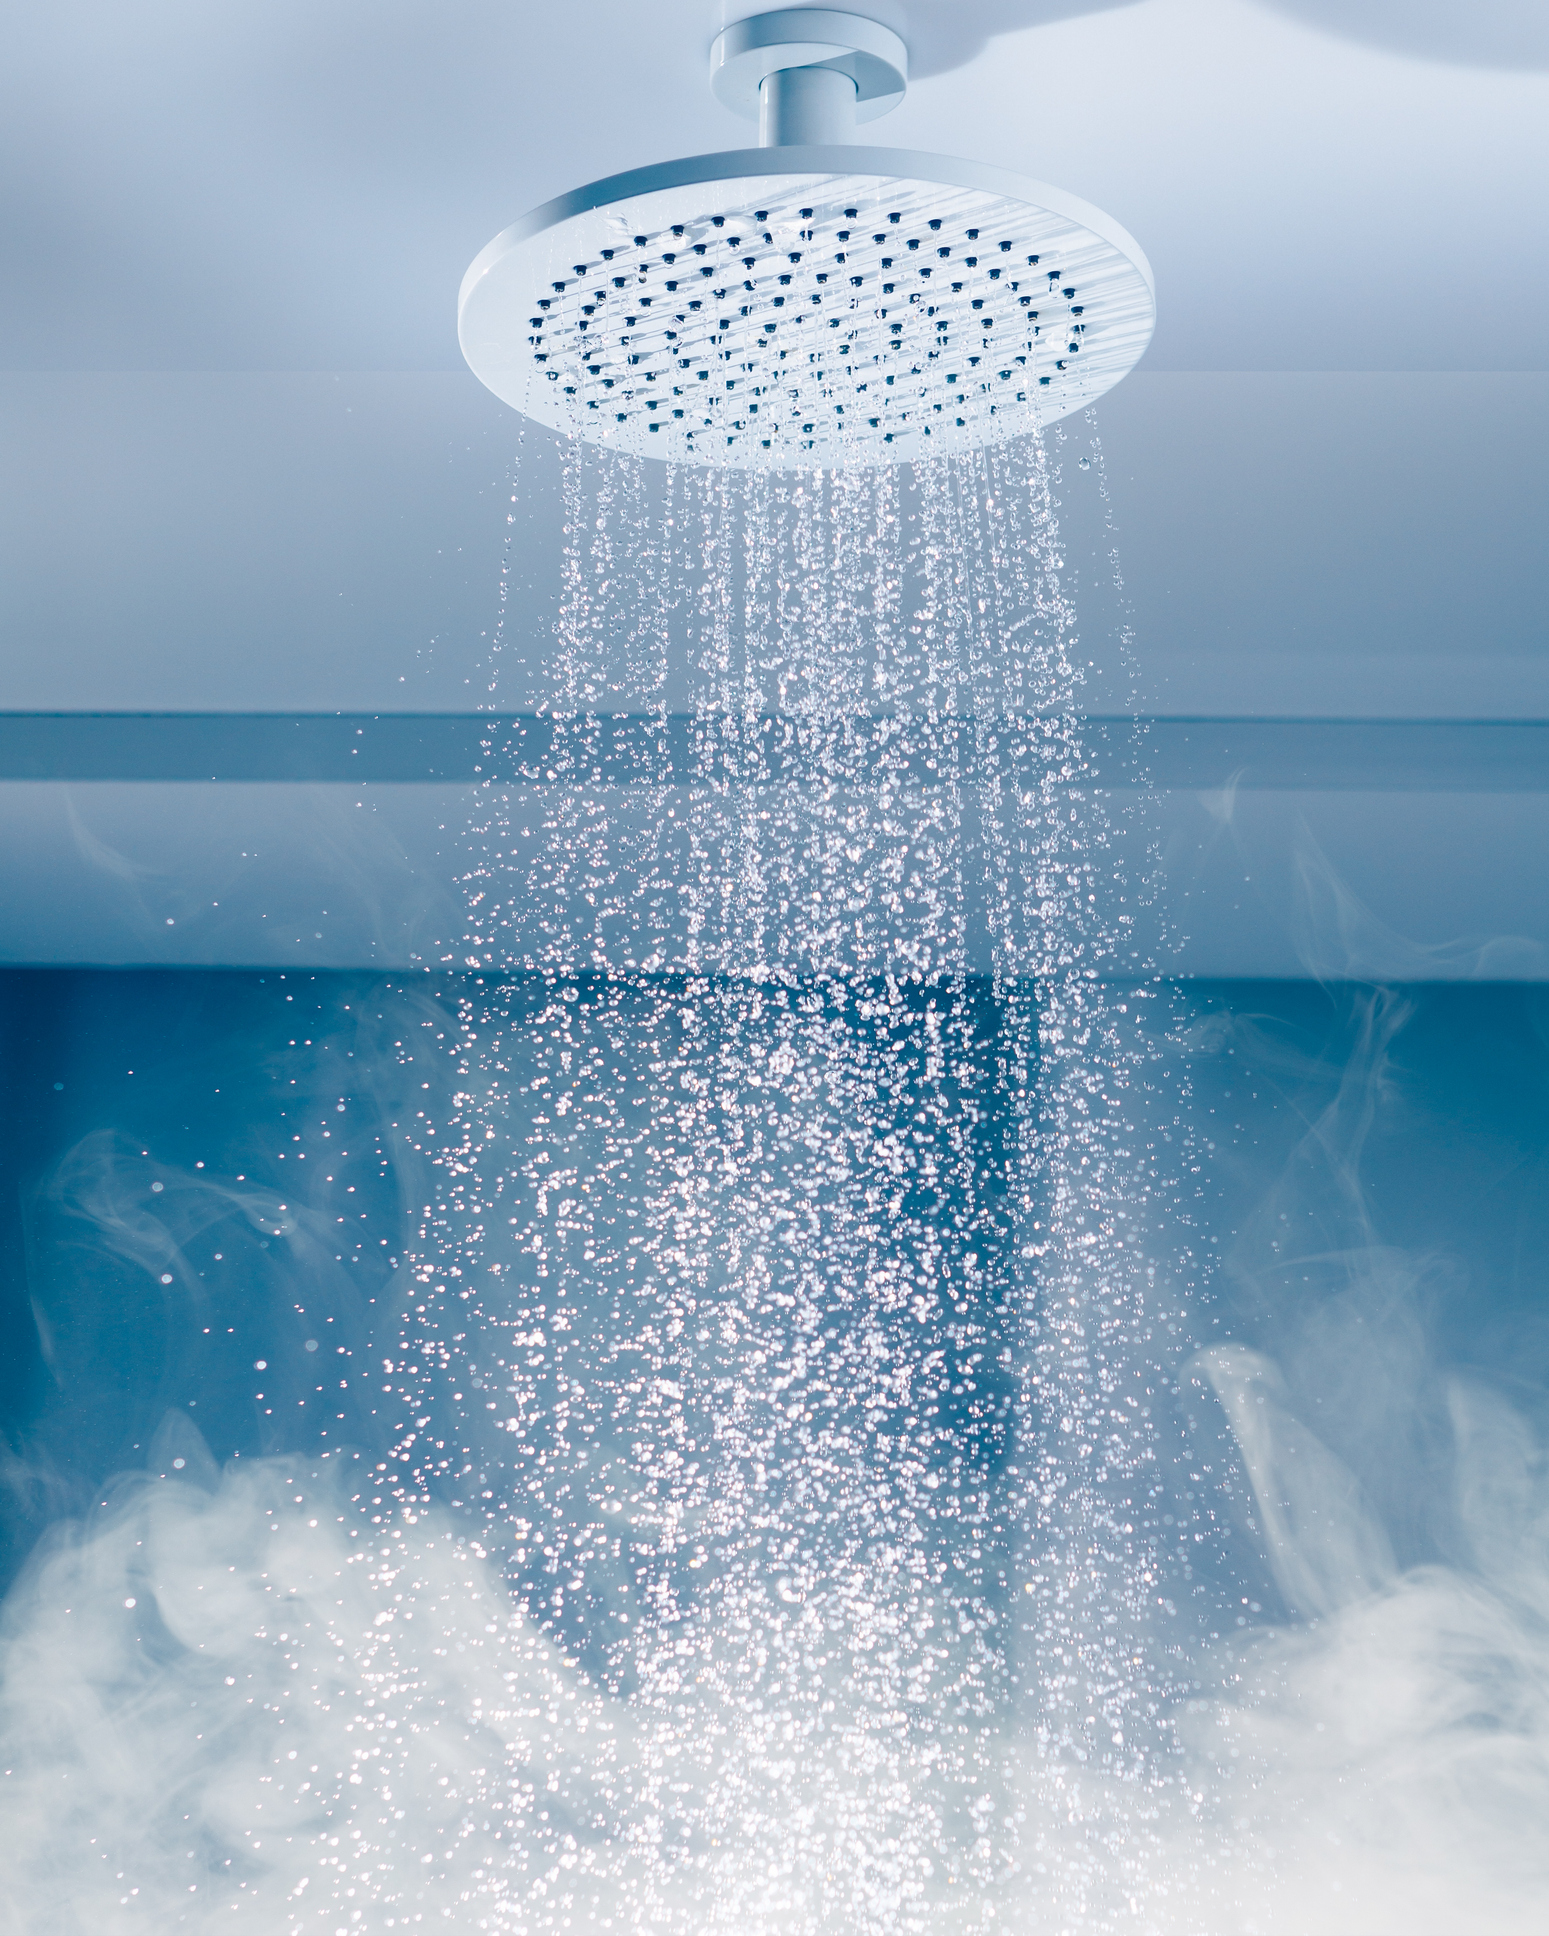 A showerhead with flowing water for an LCA post on saving water.